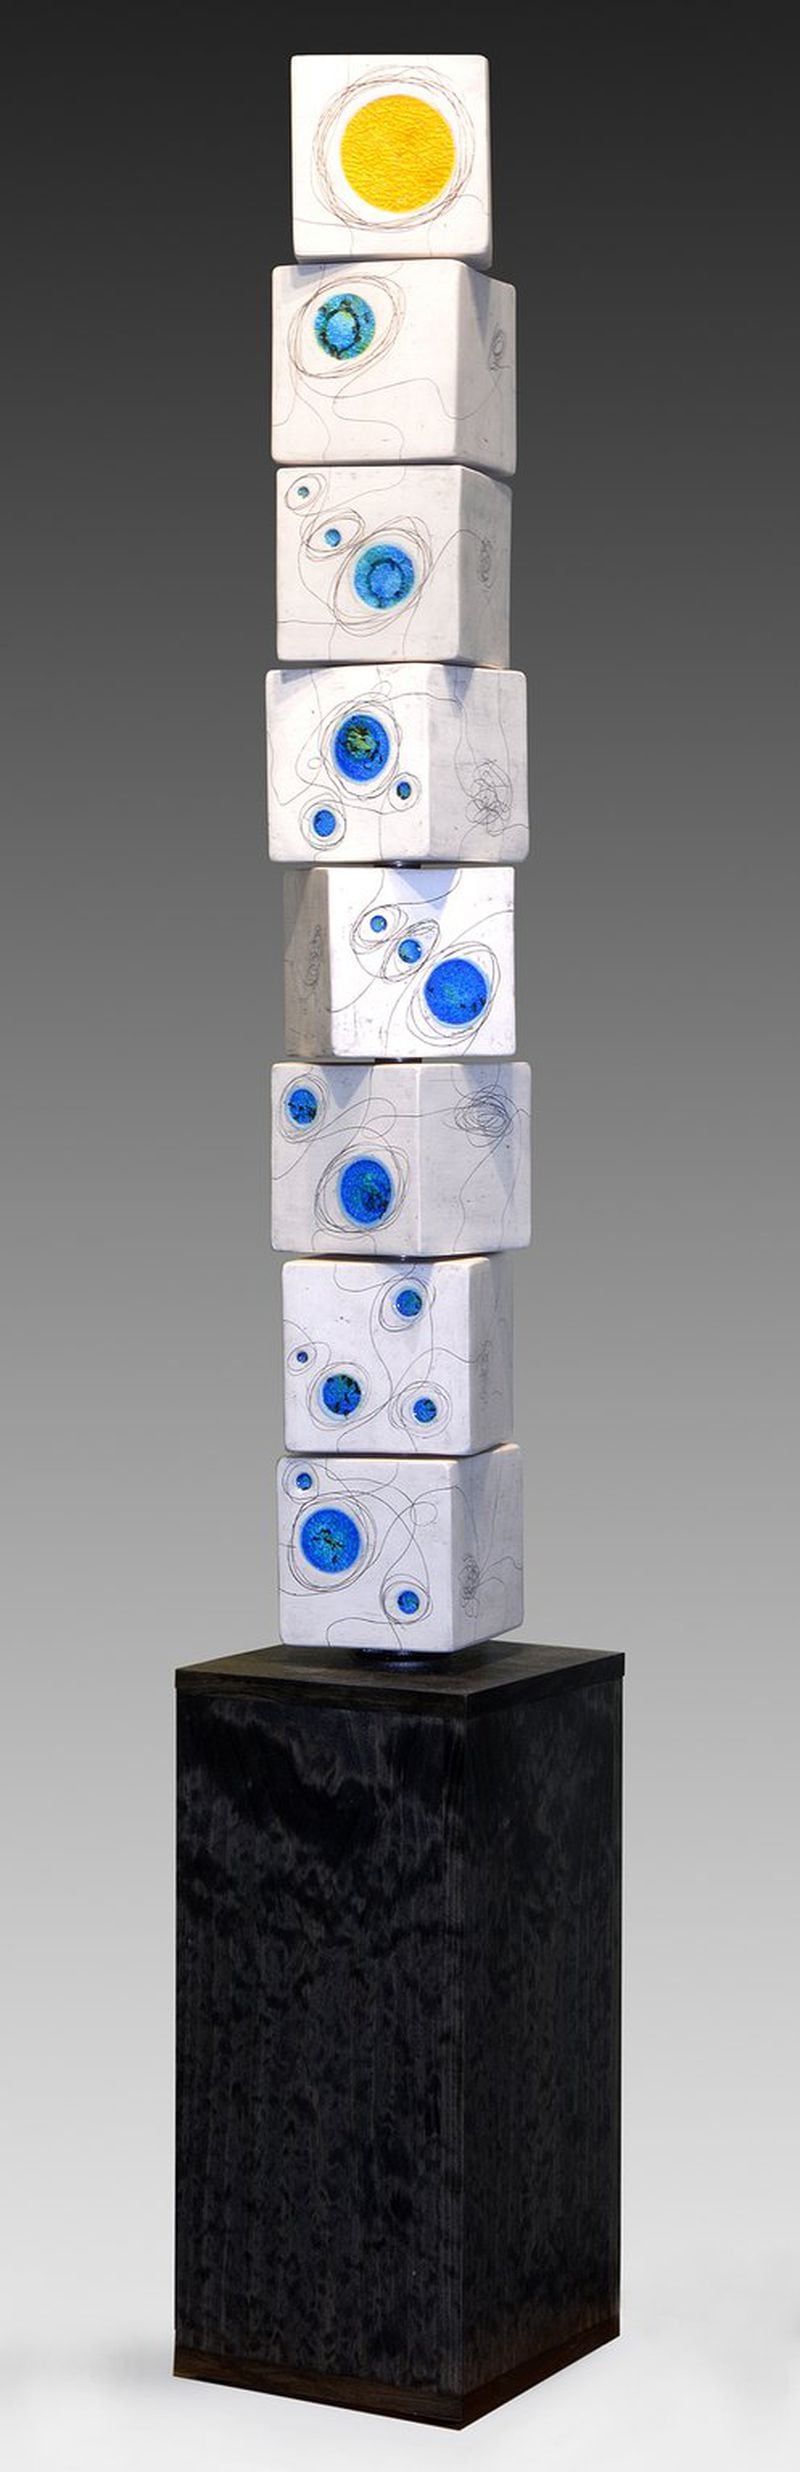 Ceramic artist Jeff Pender designs the blocks on his life-size totems to move independently from the other blocks.The interactive feature of Pender’s work allows you to be part of the creative process. (Contributed by JeffPender.com)